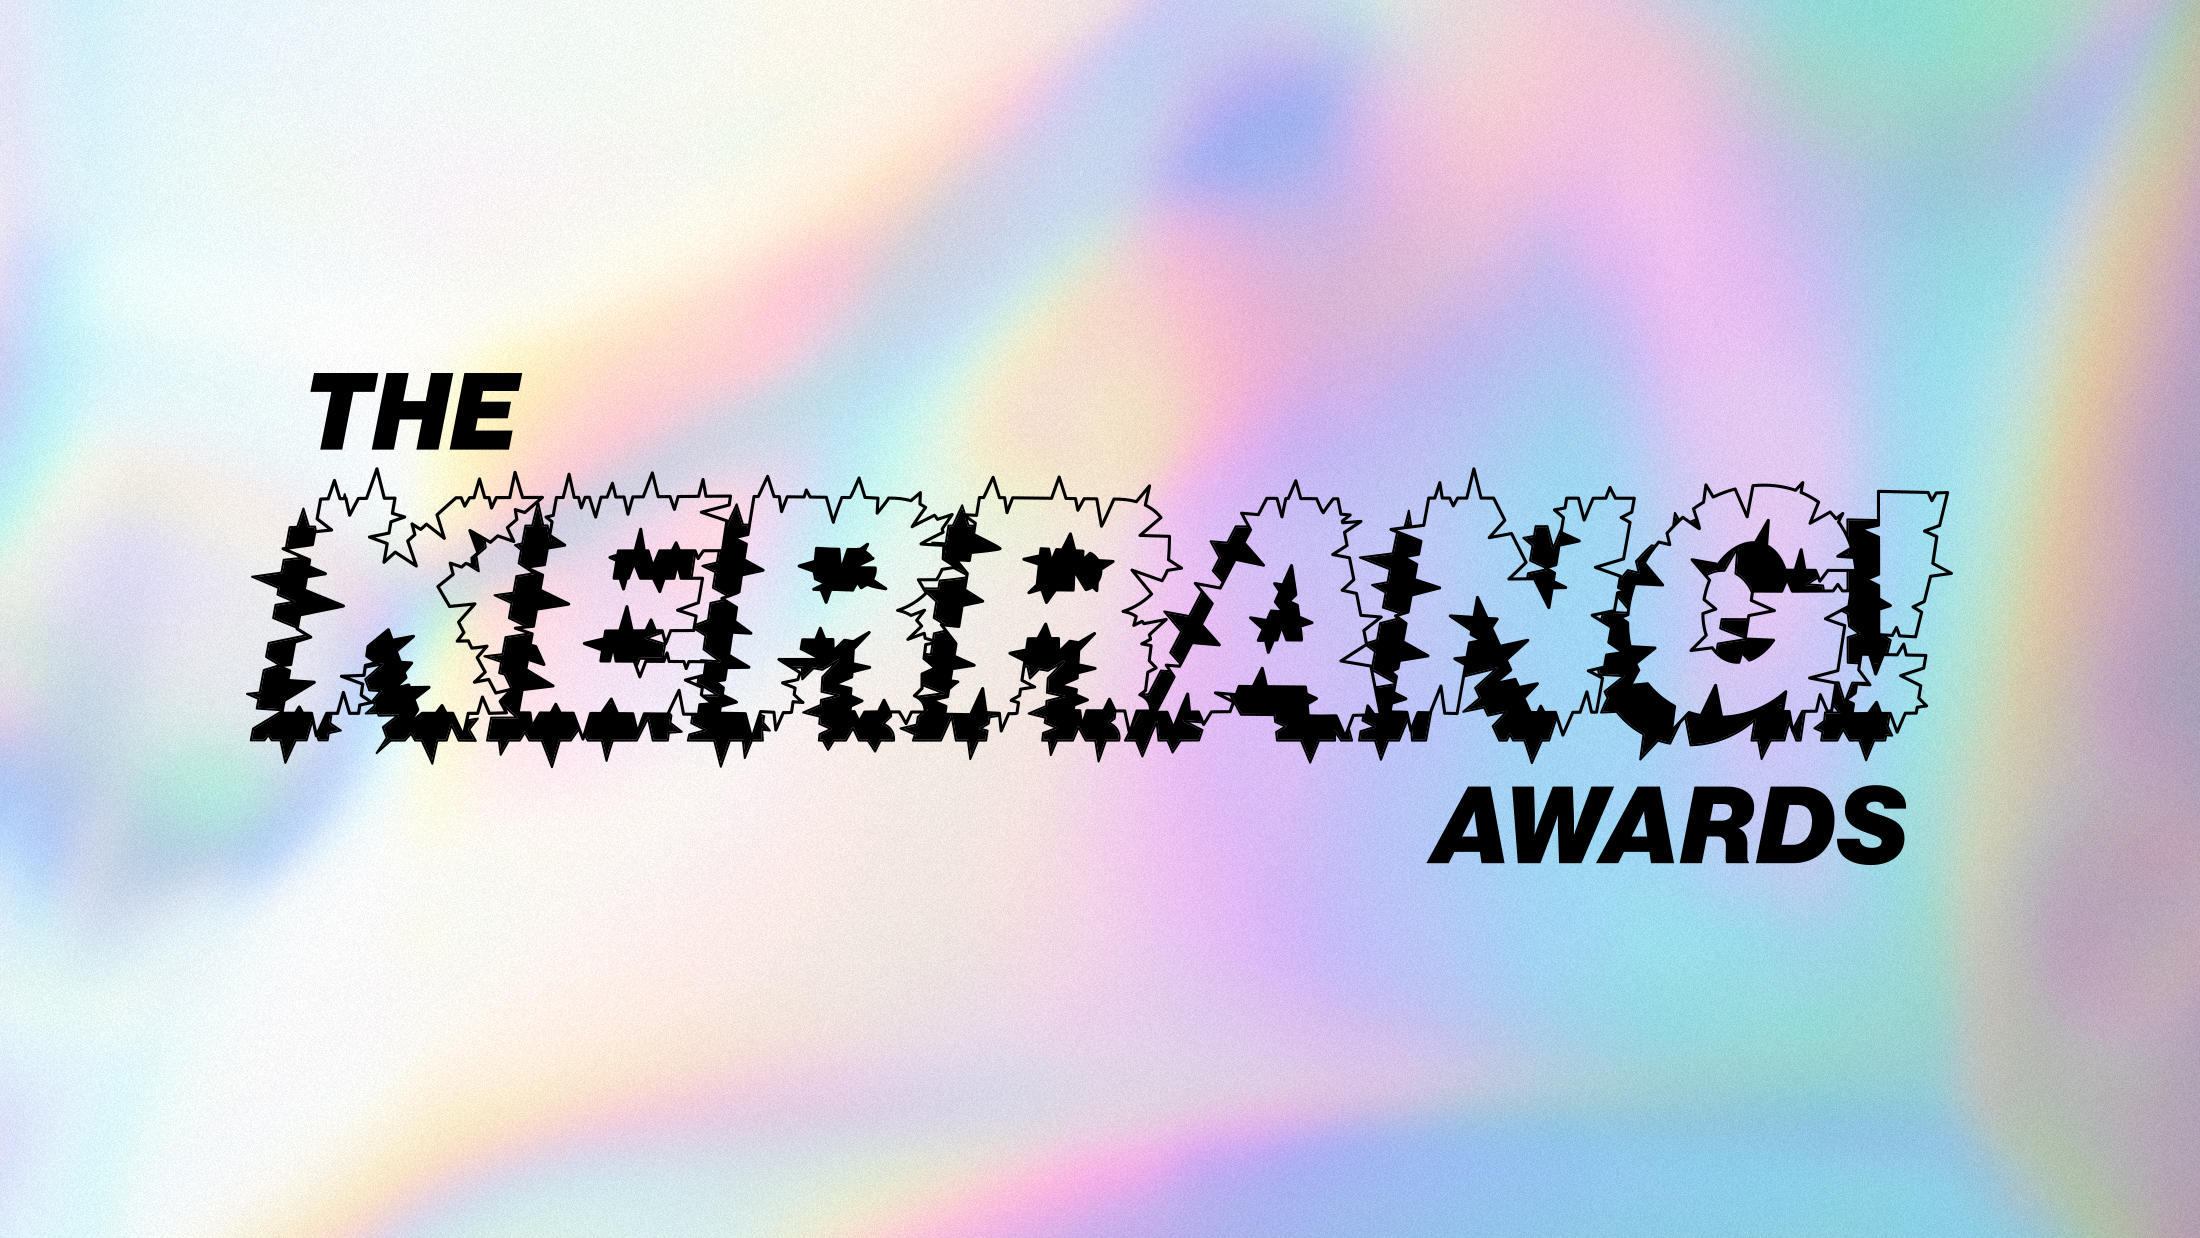 GREEN DAY, BIFFY CLYRO, FALL OUT BOY AND MORE WIN AT KERRANG AWARDS